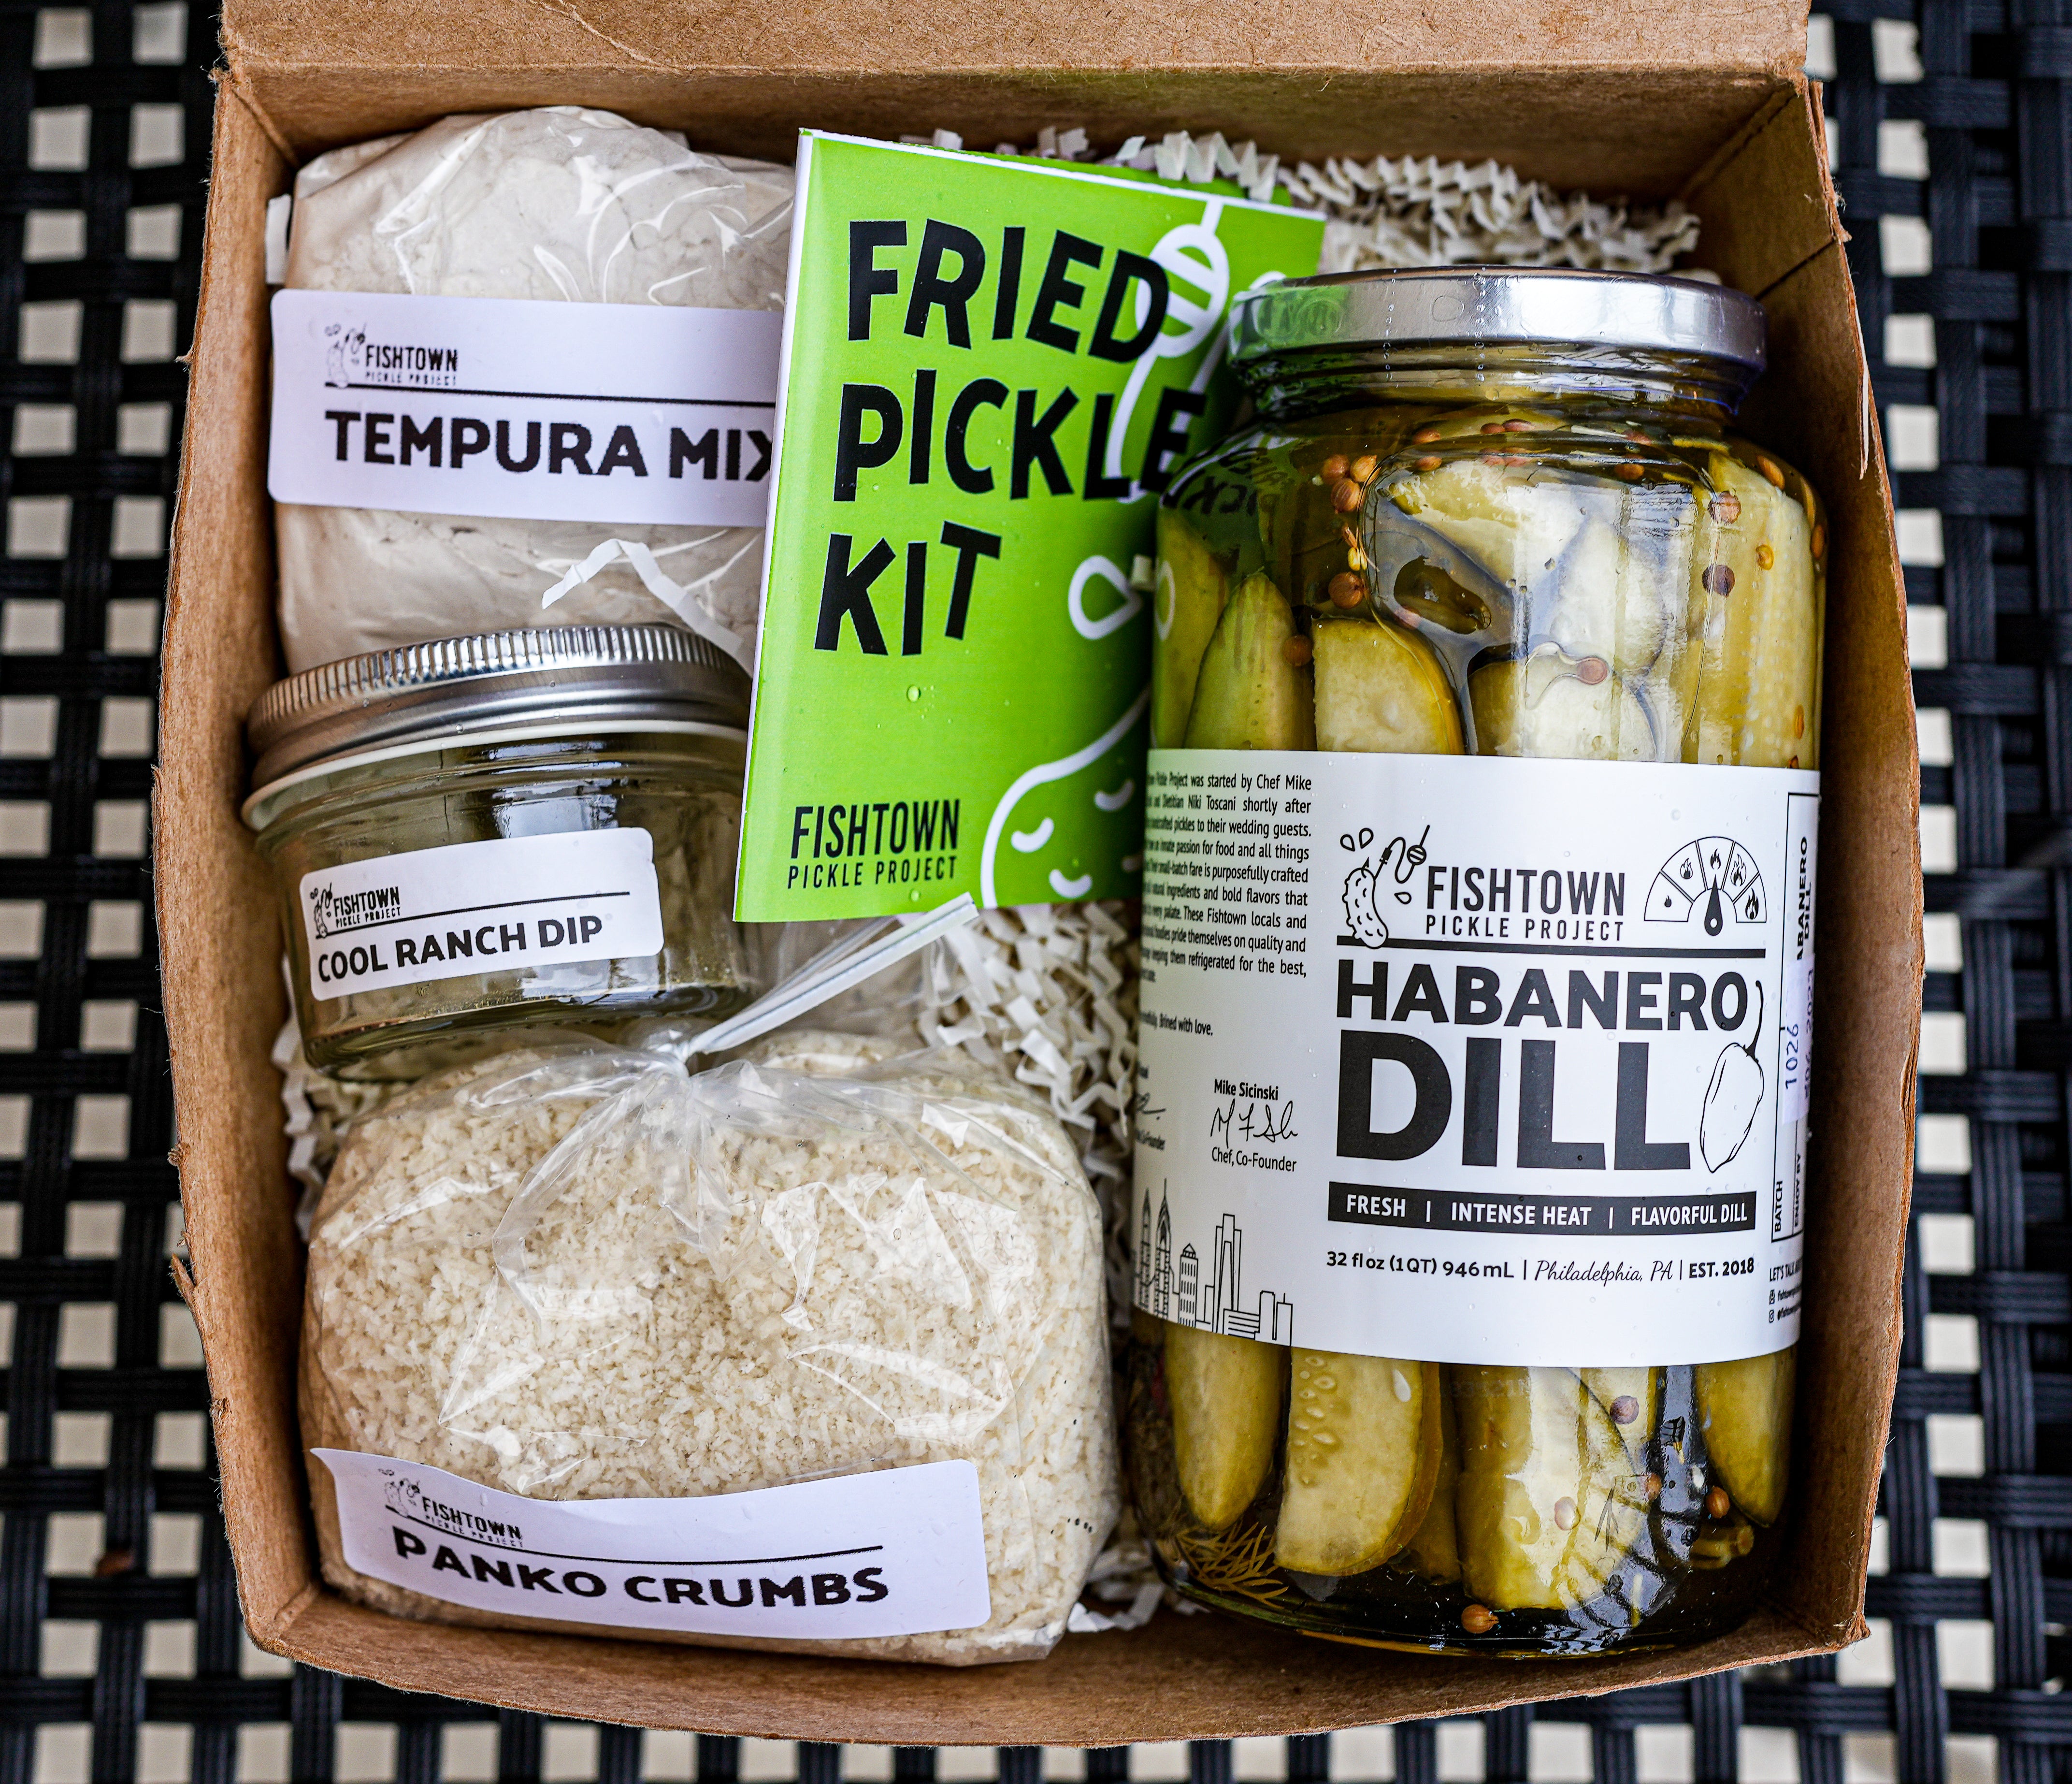 Spicy Fried Pickle Kit – Fishtown Pickle Project